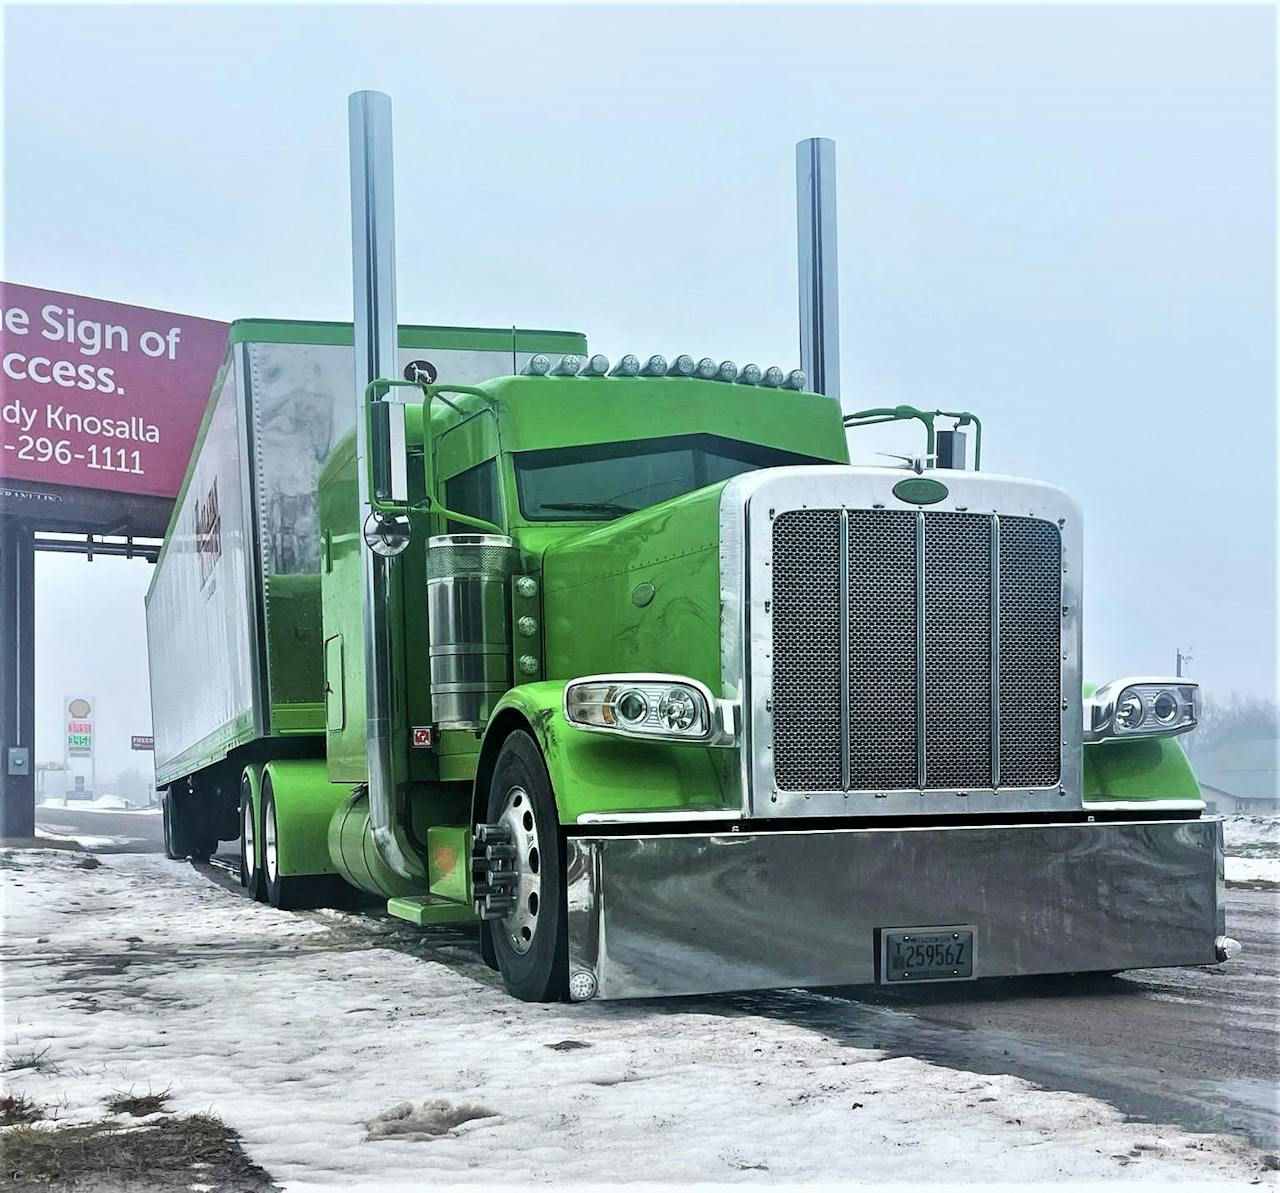 Hallahan's 2021 Peterbilt 389 parked on side of road in the snow